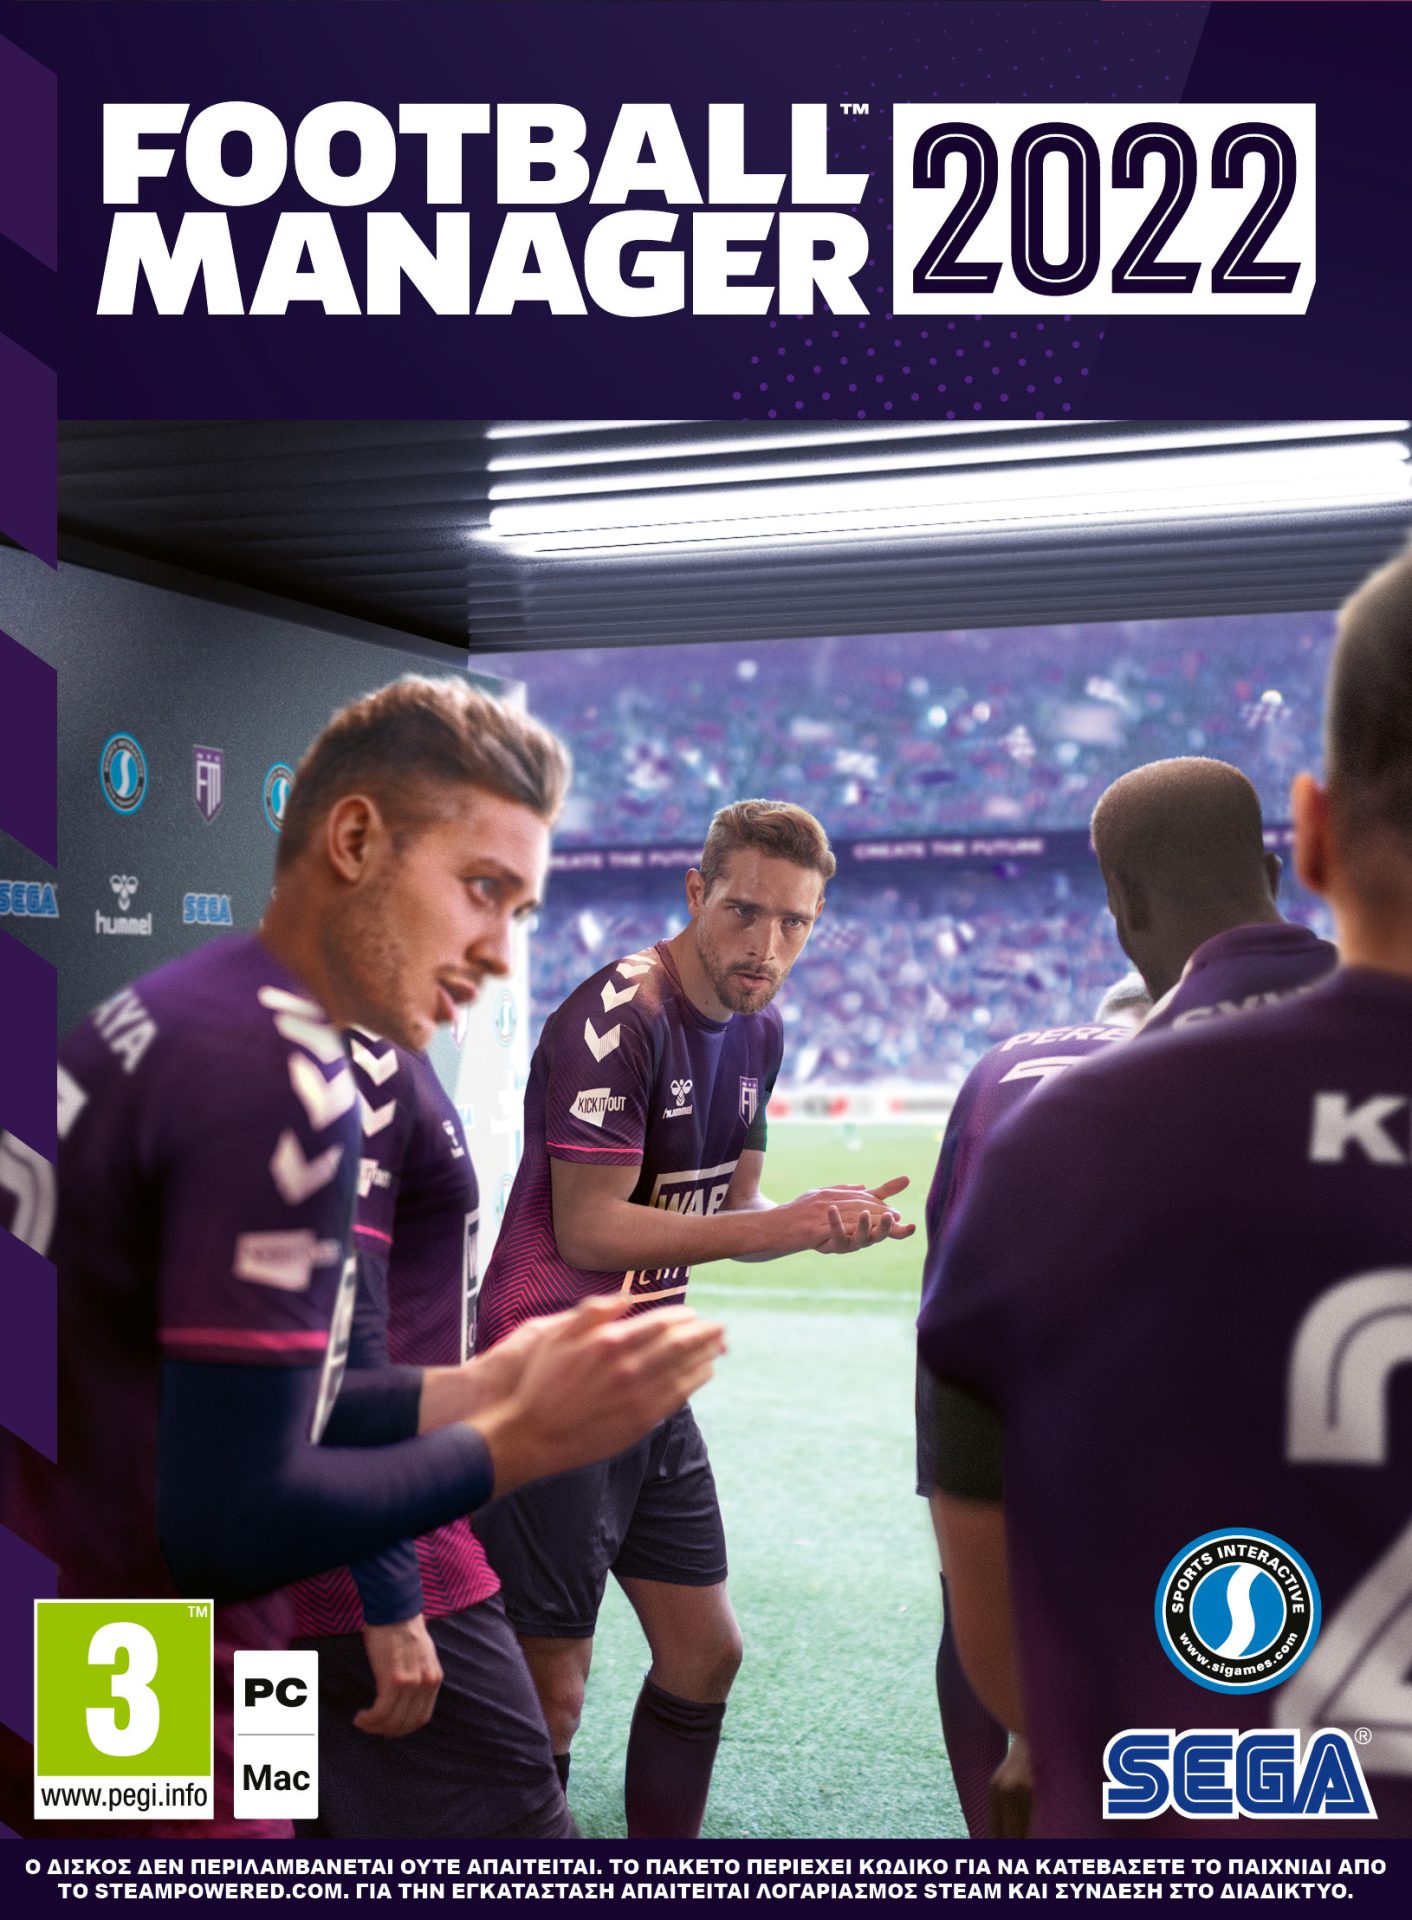 Football Manager 2022 (Code-in-a-box) GR PC - SEGA 1.18.01.09.029